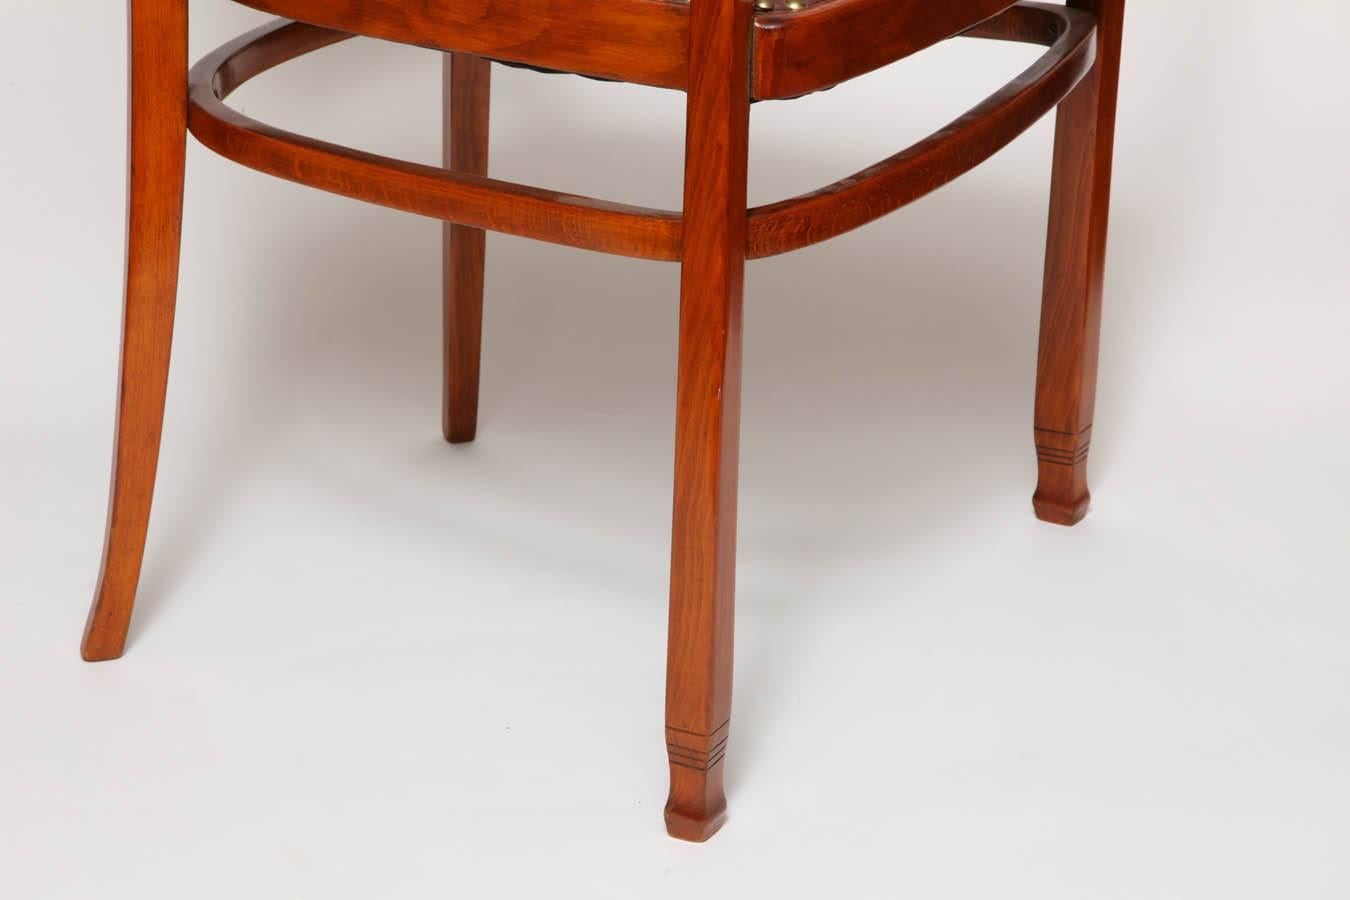 Austrian Otto Wagner Secessionist Bentwood and Leather Armchair, J&J Kohn, 1906 For Sale